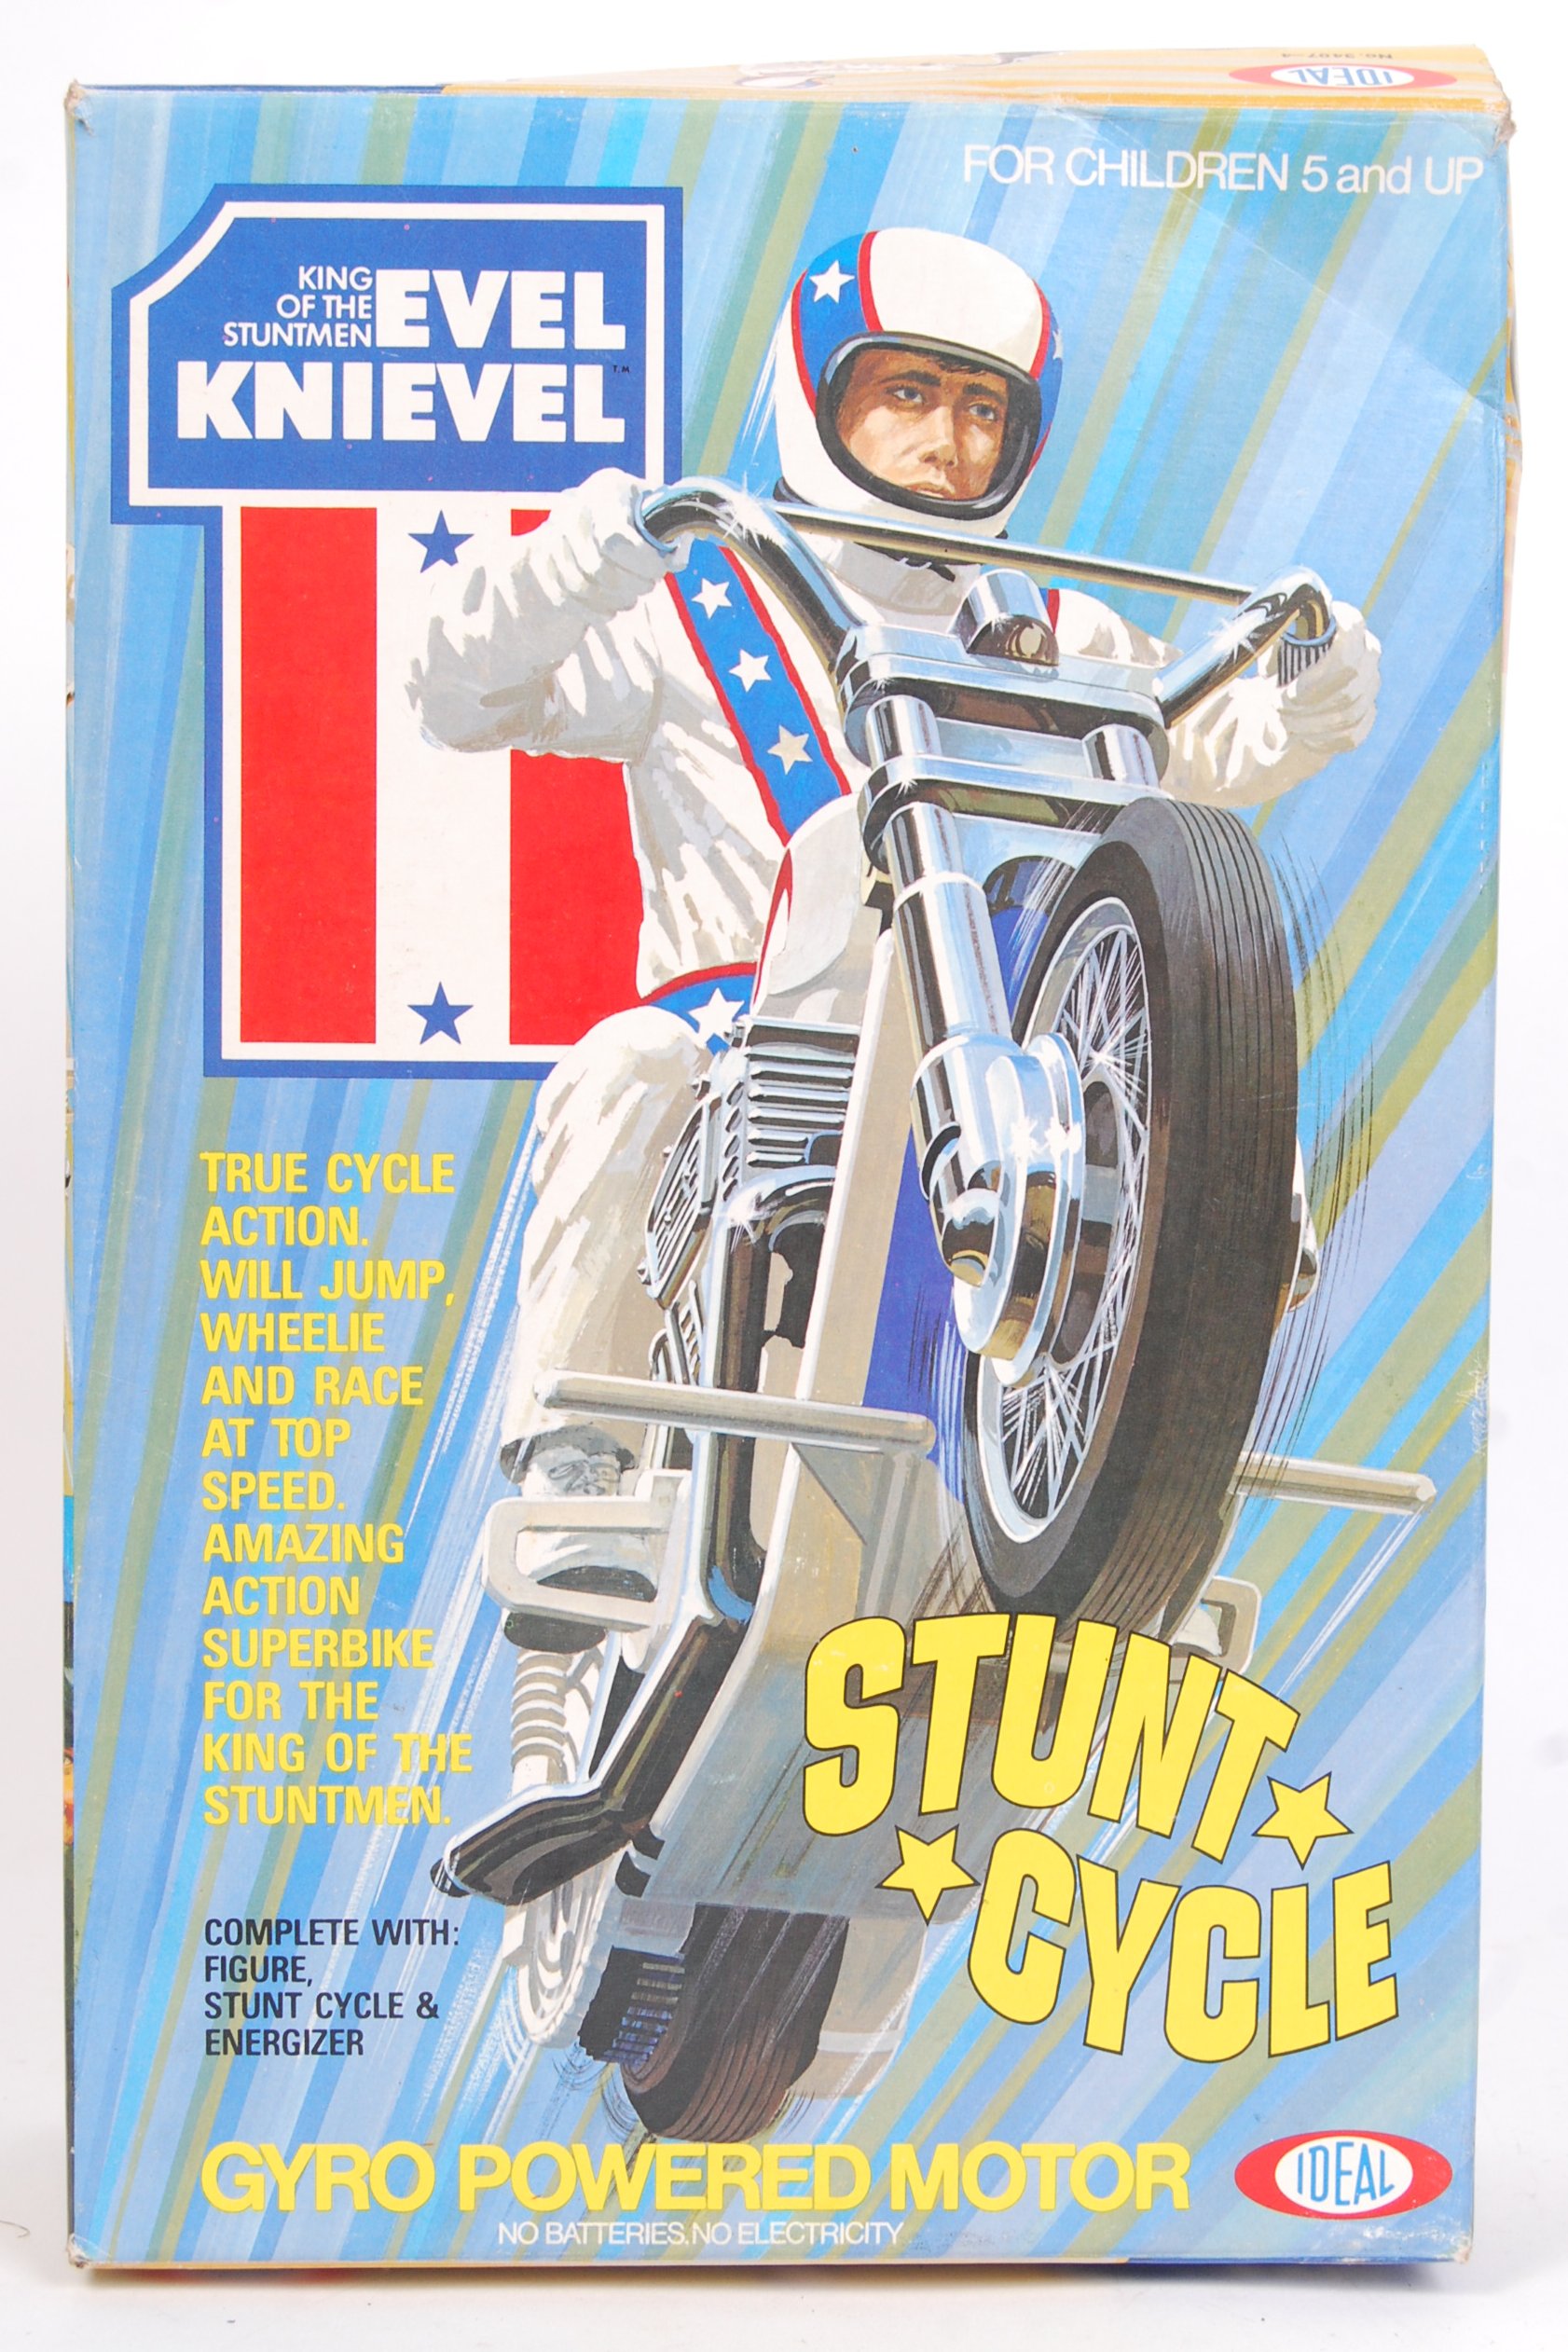 VINTAGE EVEL KNIEVEL STUNT CYCLE PLAYSET AND BOX